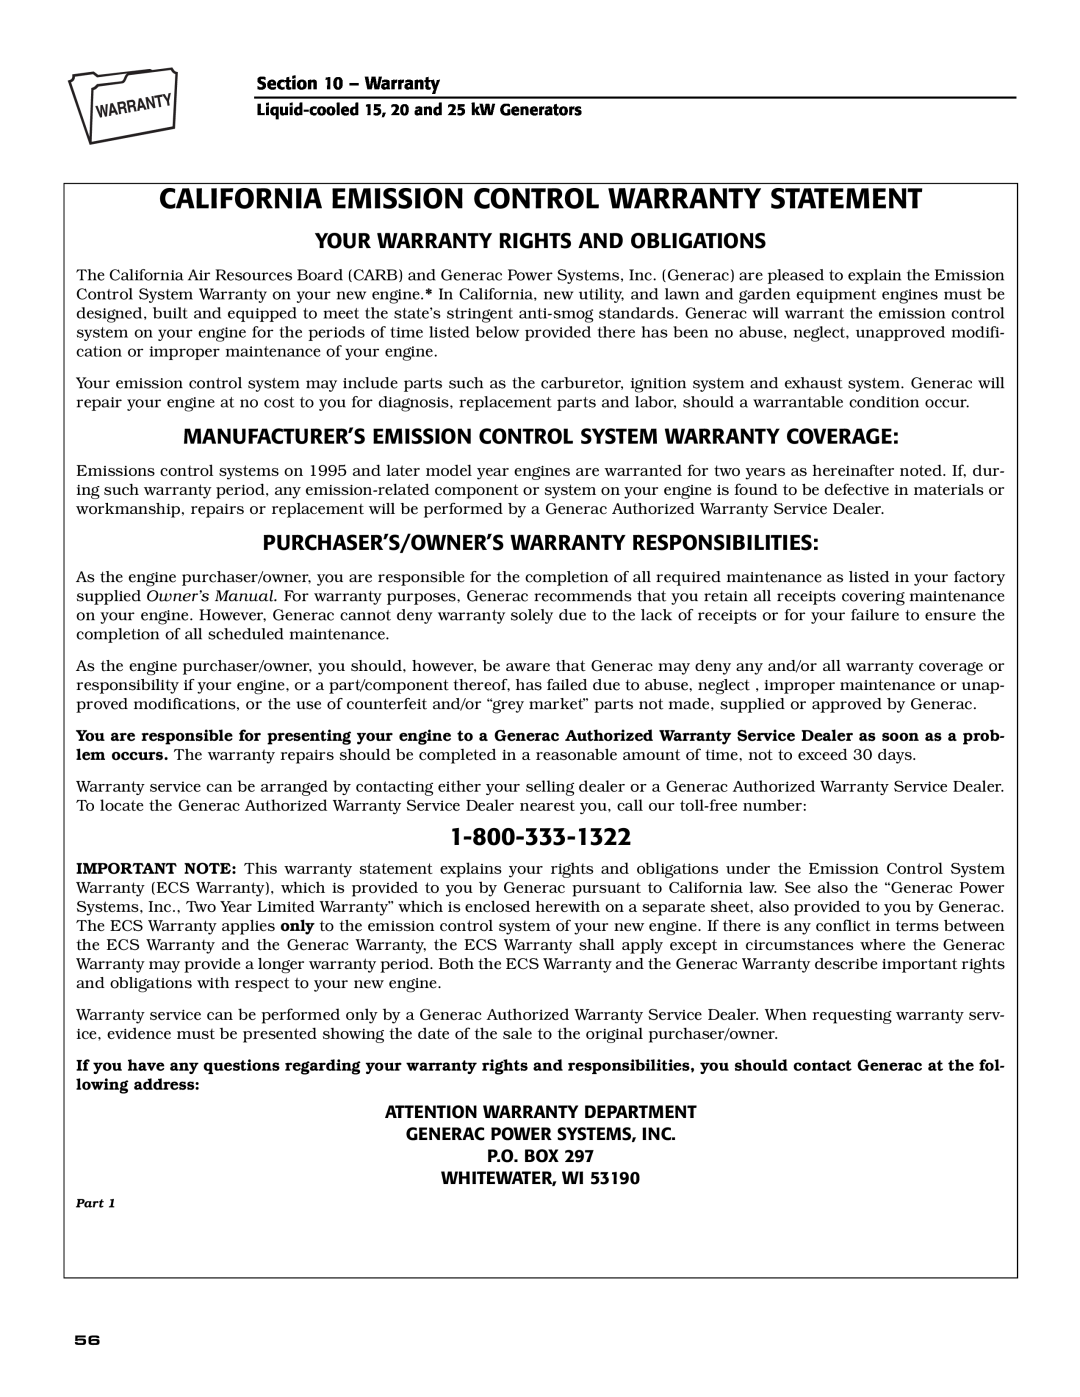 Generac 005028-0 Your Warranty Rights And Obligations, Manufacturer’S Emission Control System Warranty Coverage 